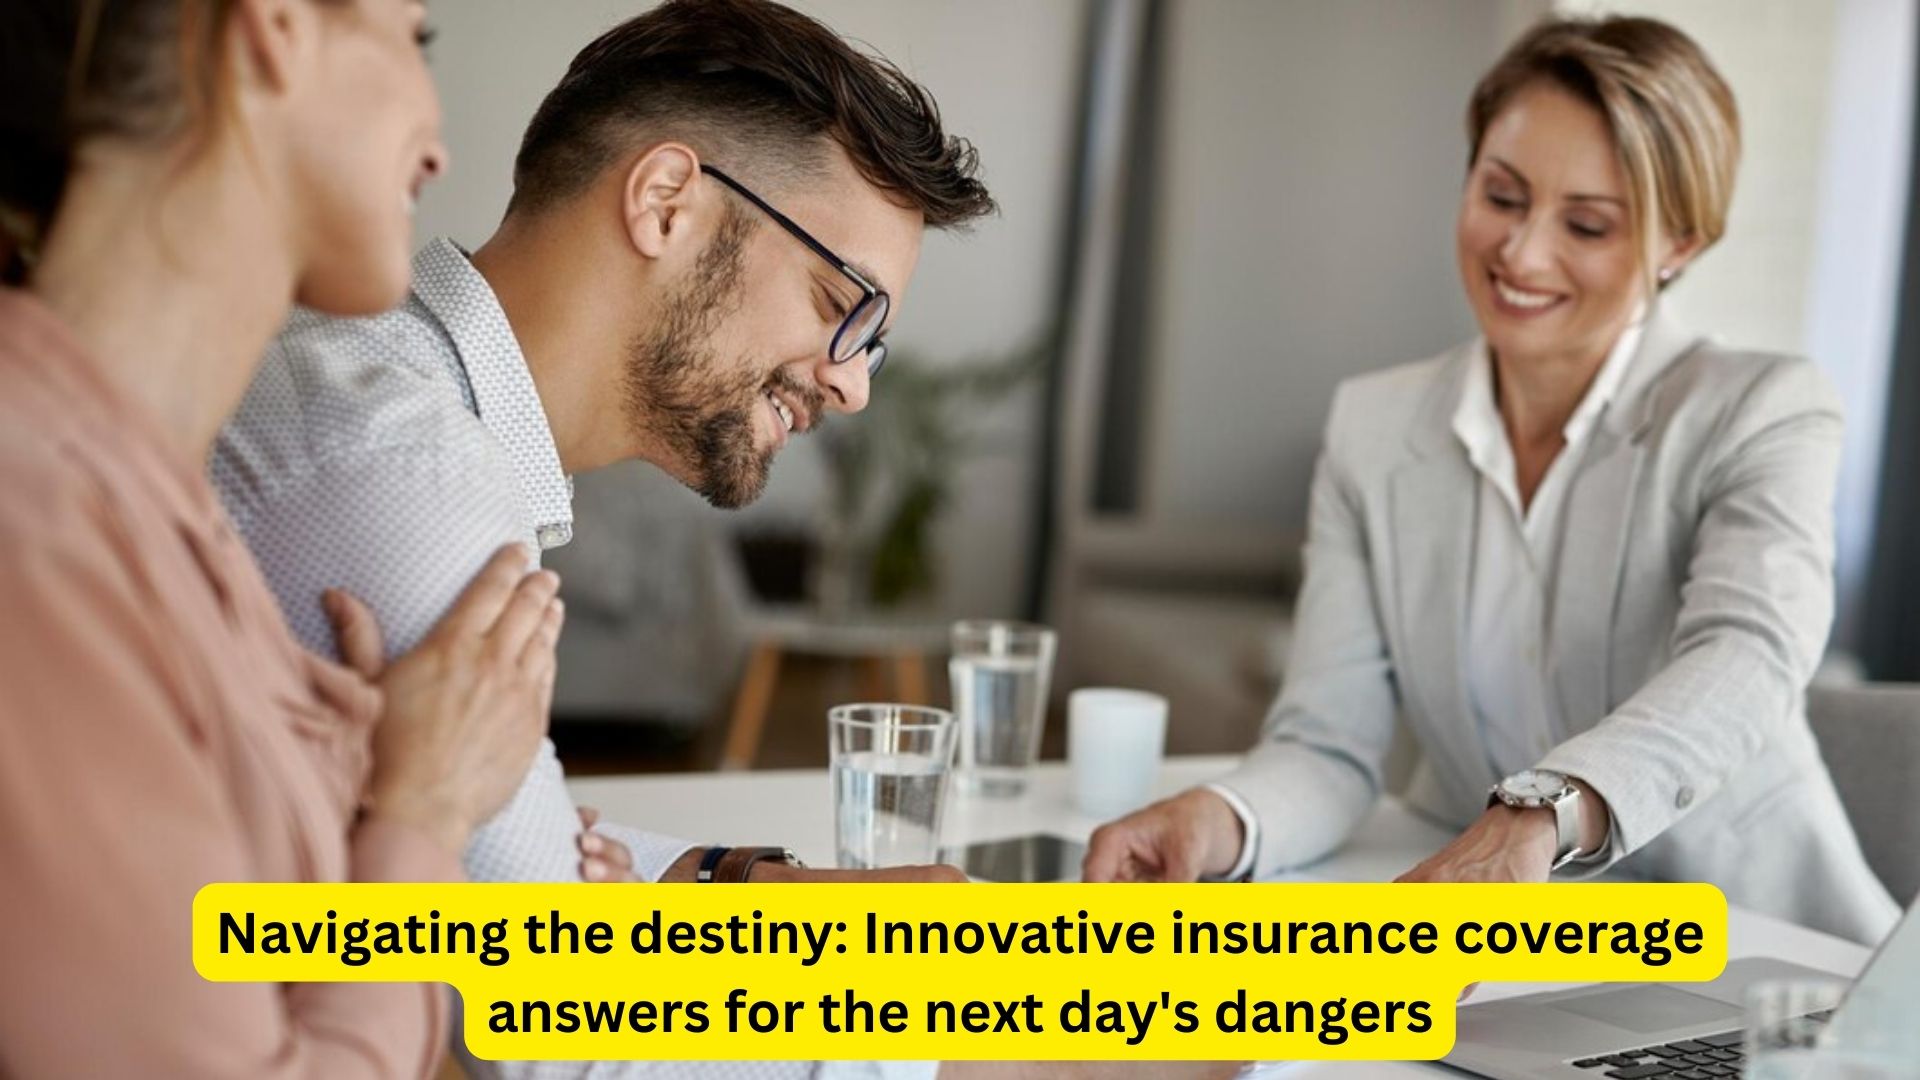 Navigating the destiny: Innovative insurance coverage answers for the next day’s dangers